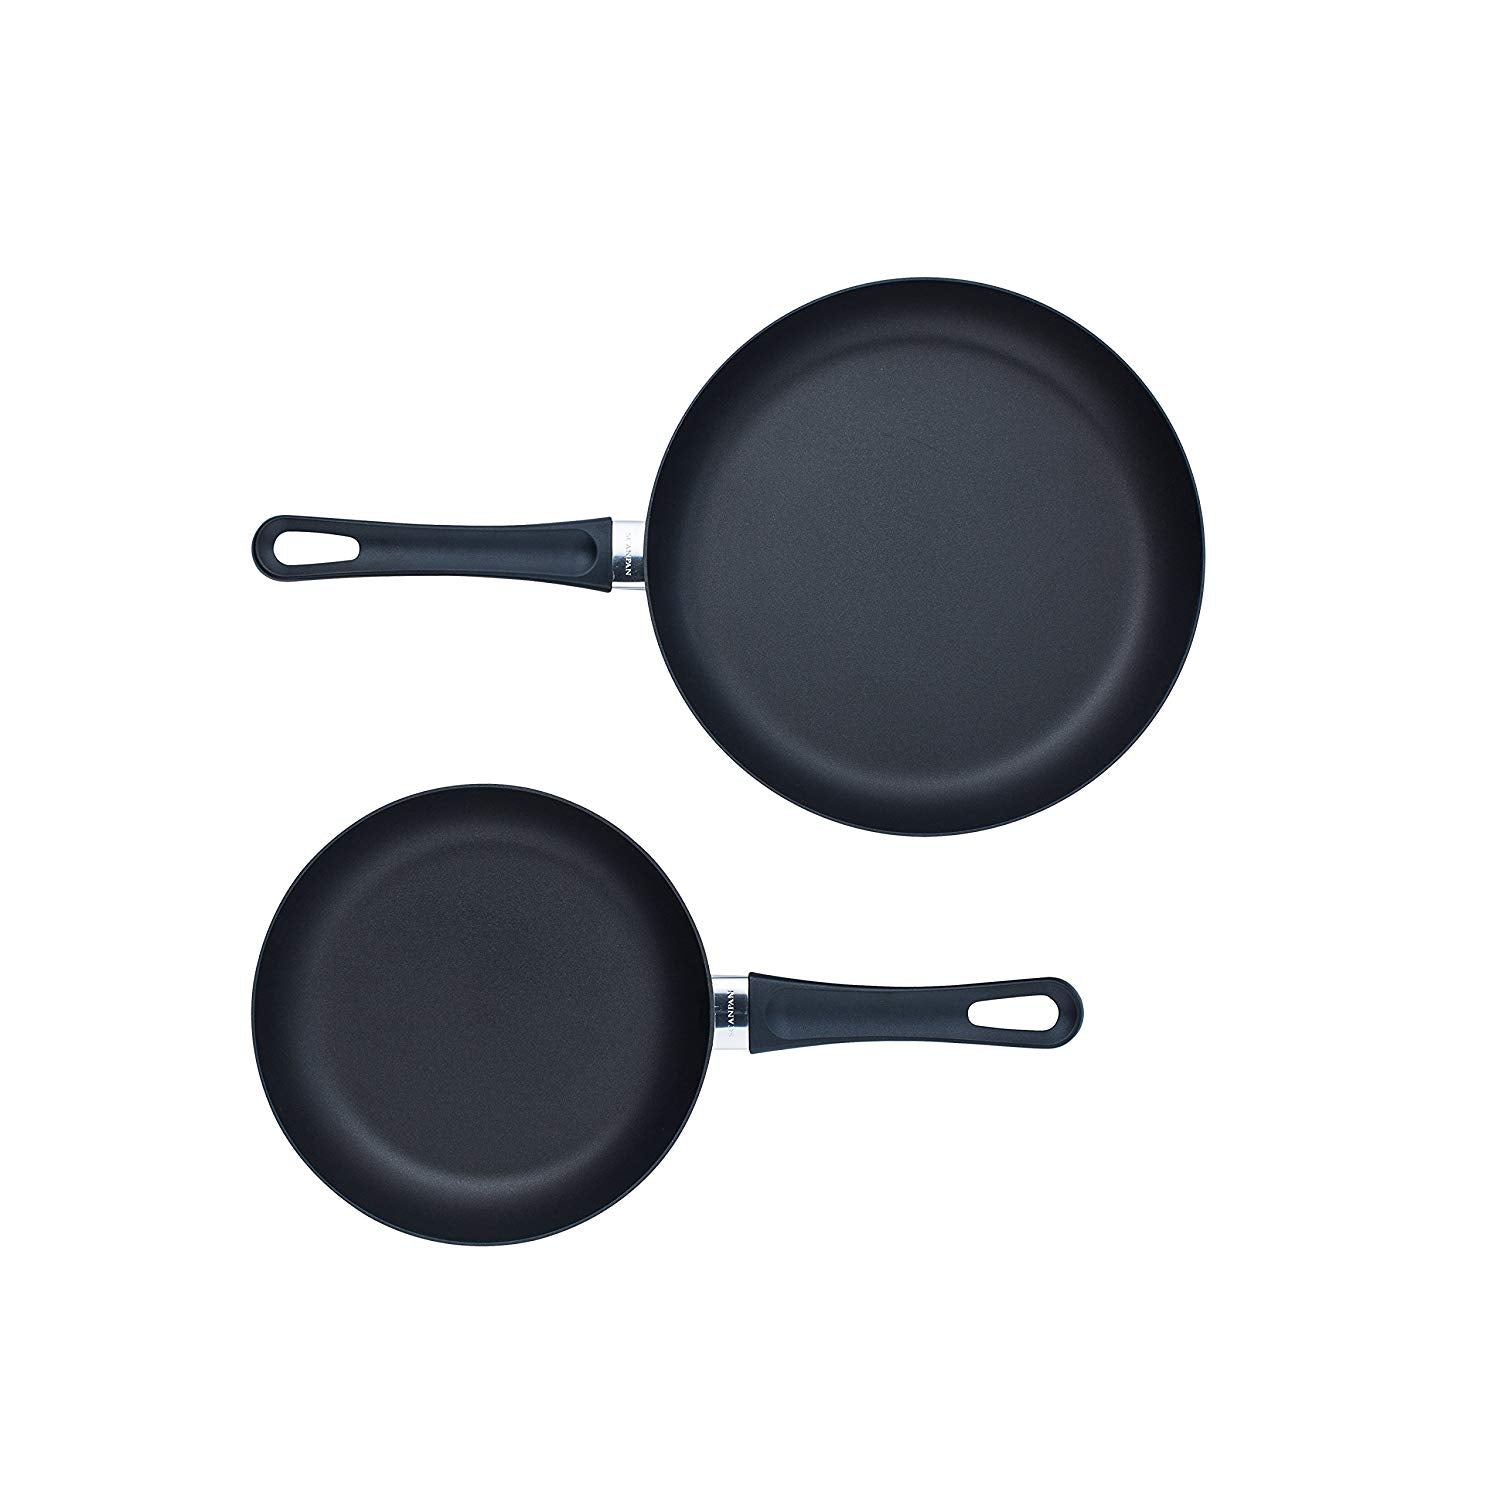 Scanpan Classic 2 Piece Fry Pan Set, Black, 8-inch and 10.25 inch